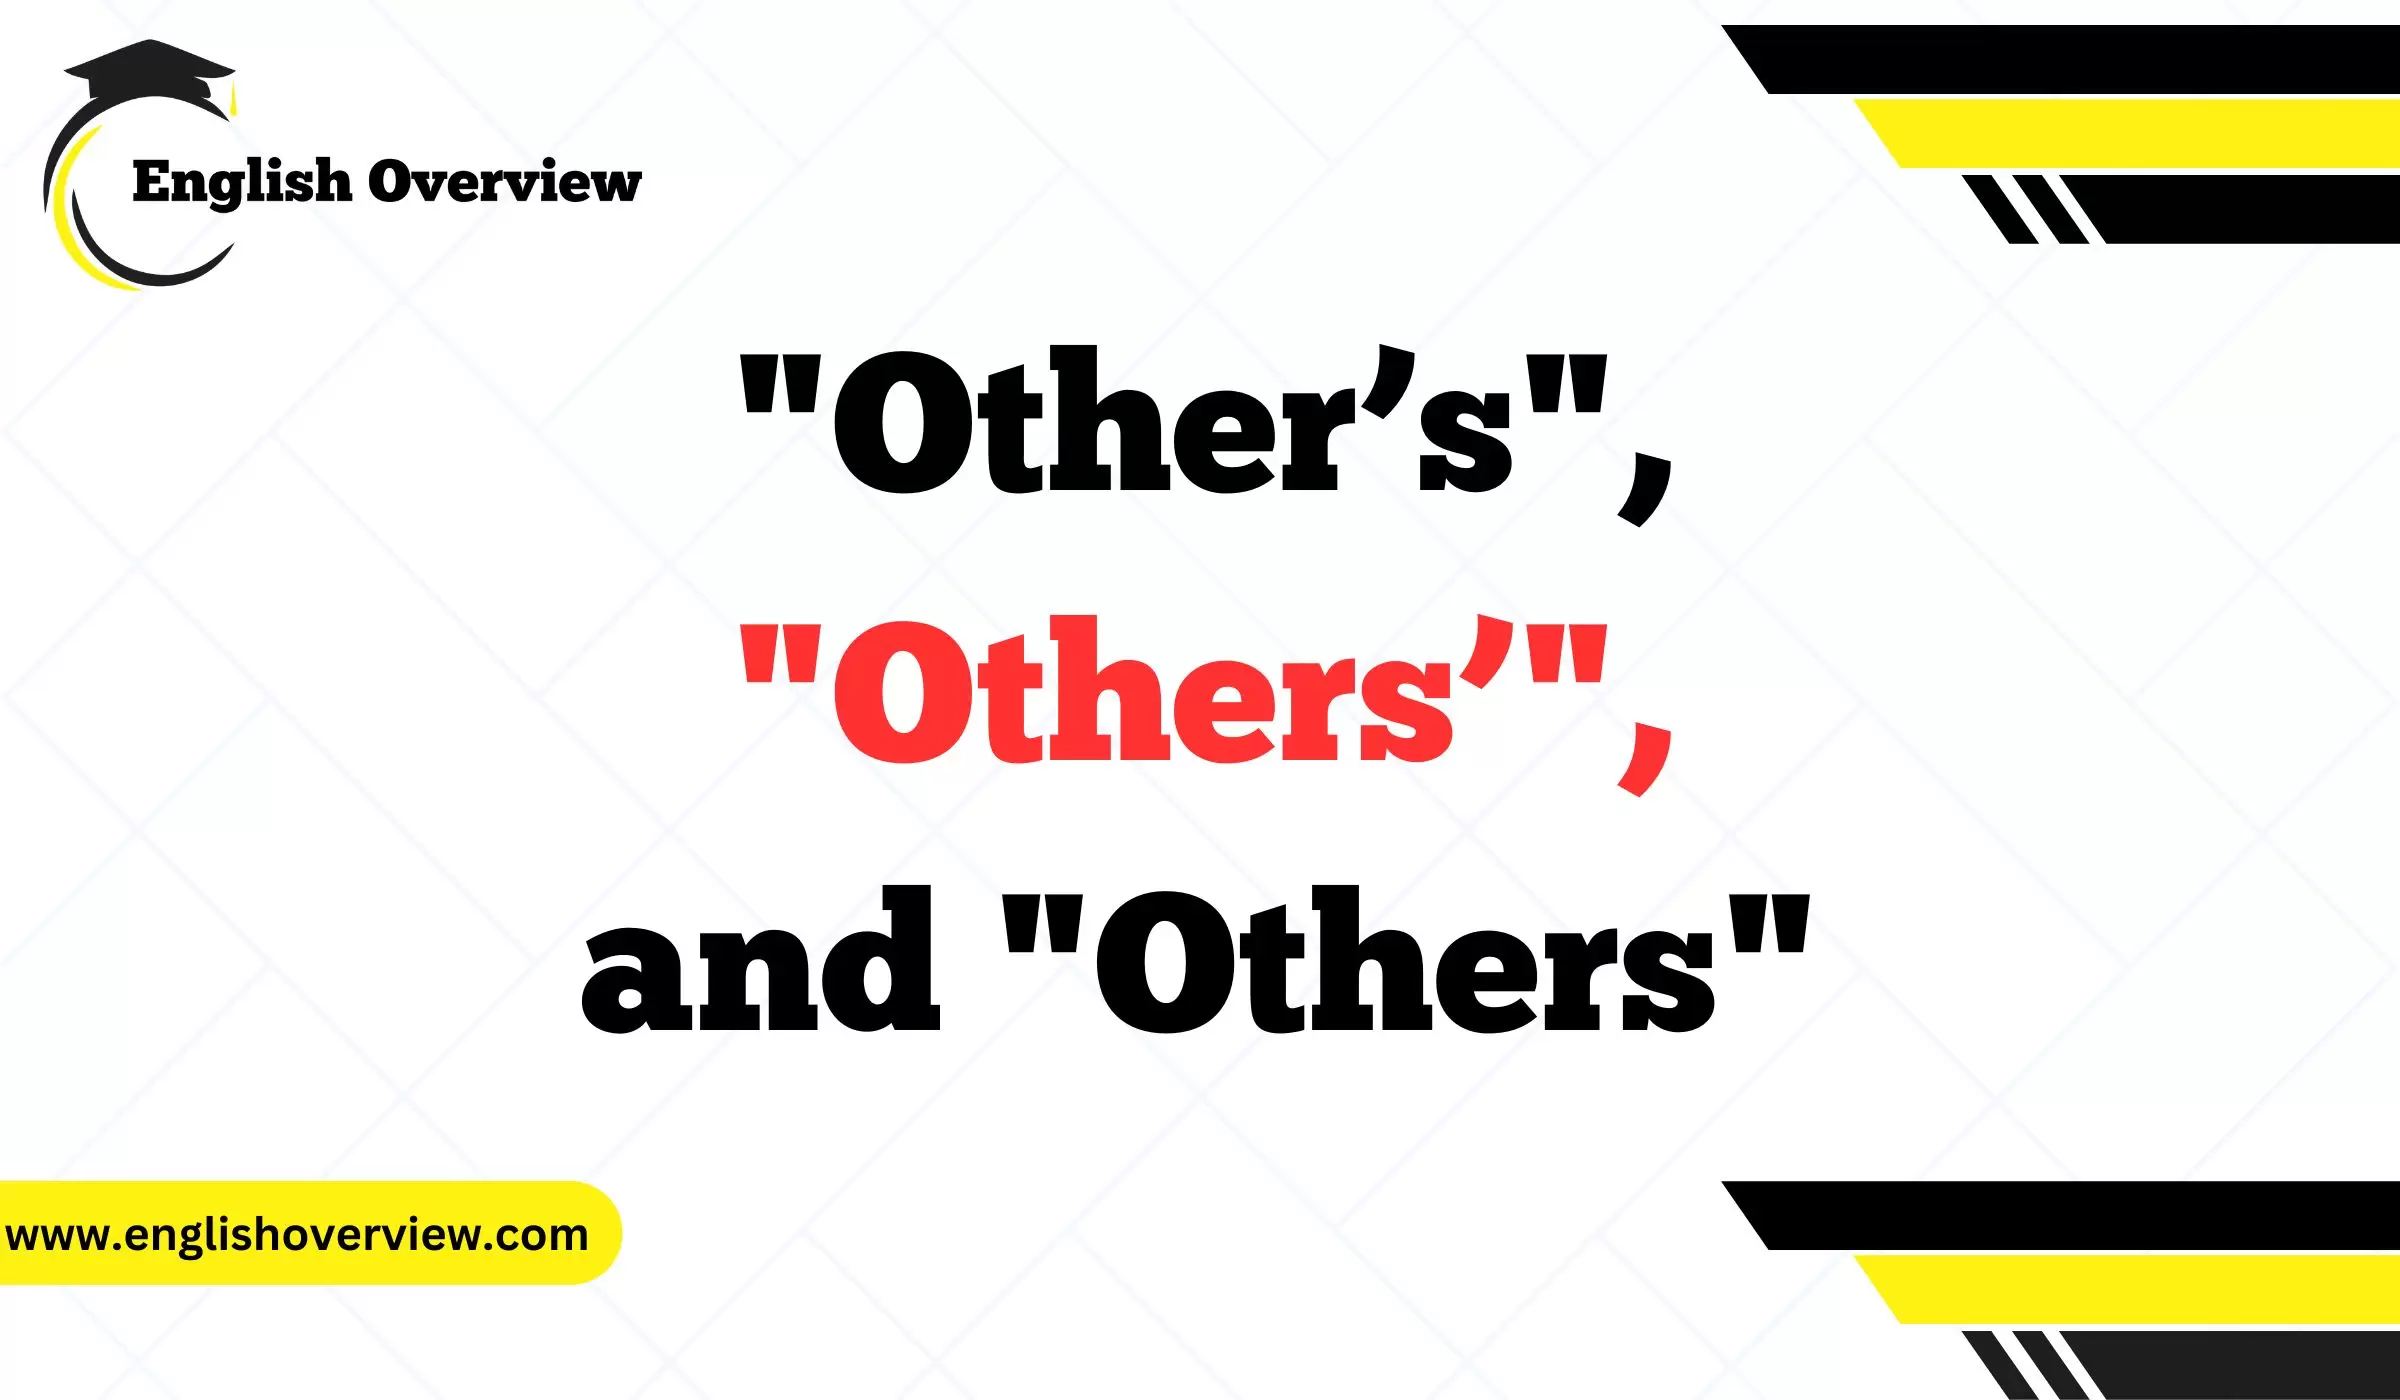 Understanding "Other’s", "Others’", and "Others": A Simple Guide